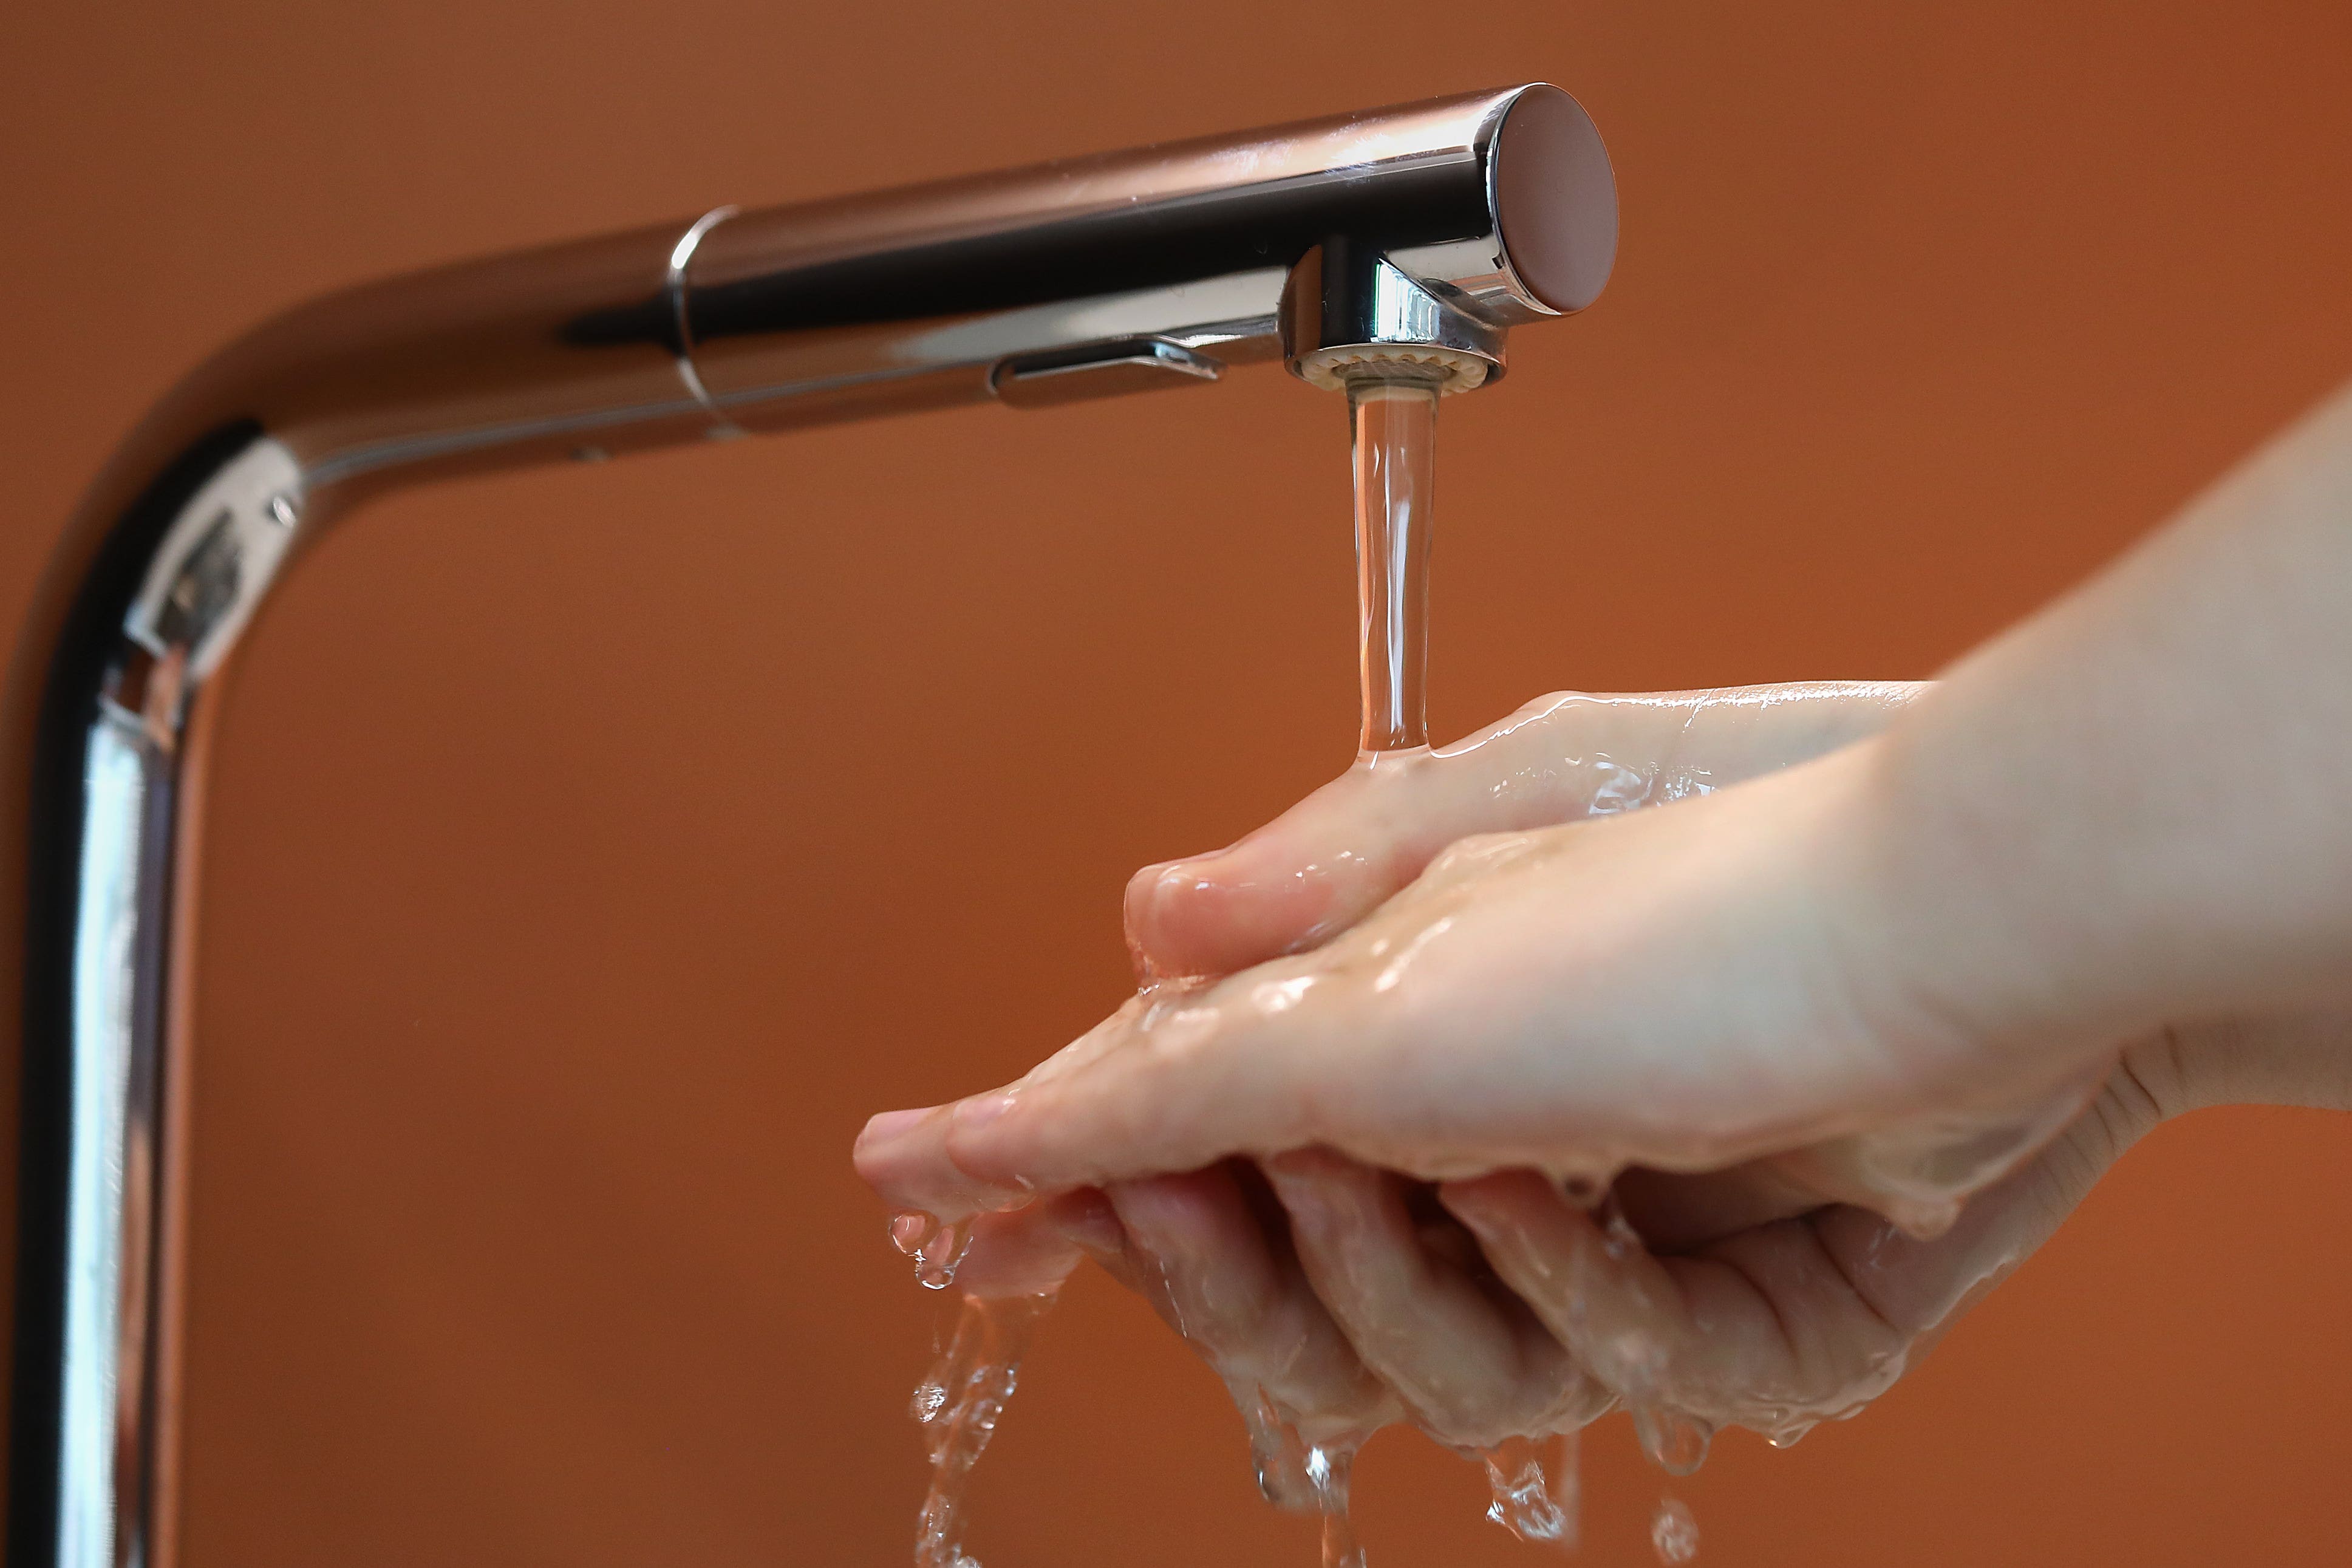 People are advised to wash their hands with soap and warm water to help stop any further spread of infection